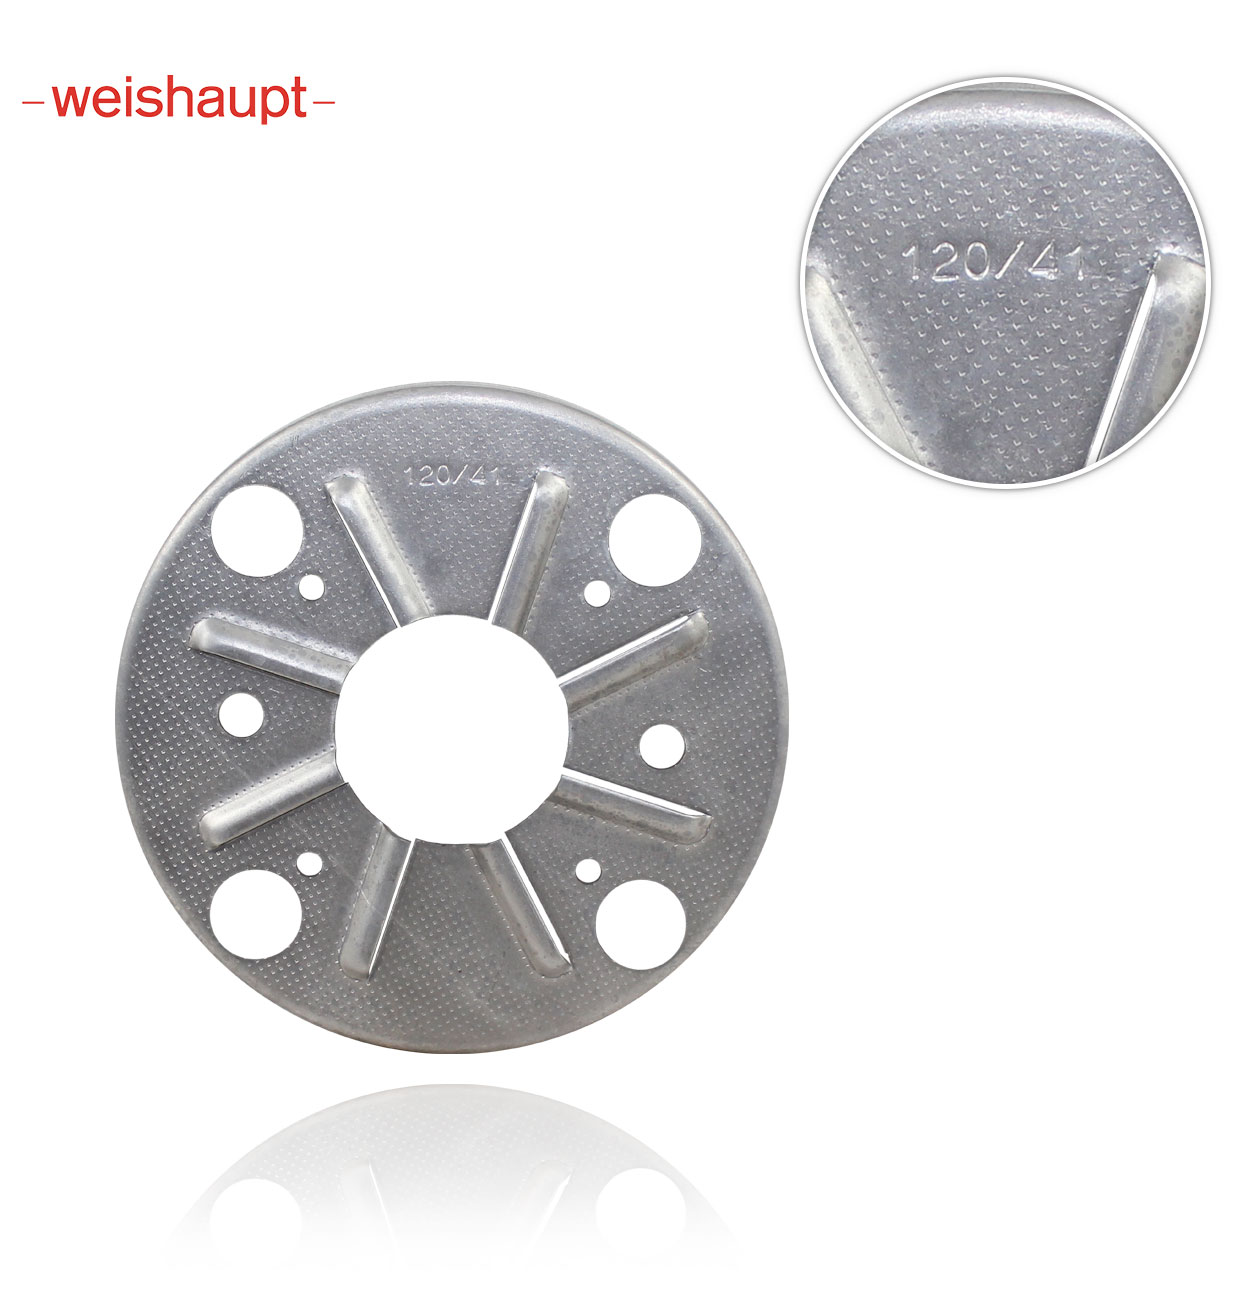 PLATE FOR WG40 WEISHAUPT 23240014157